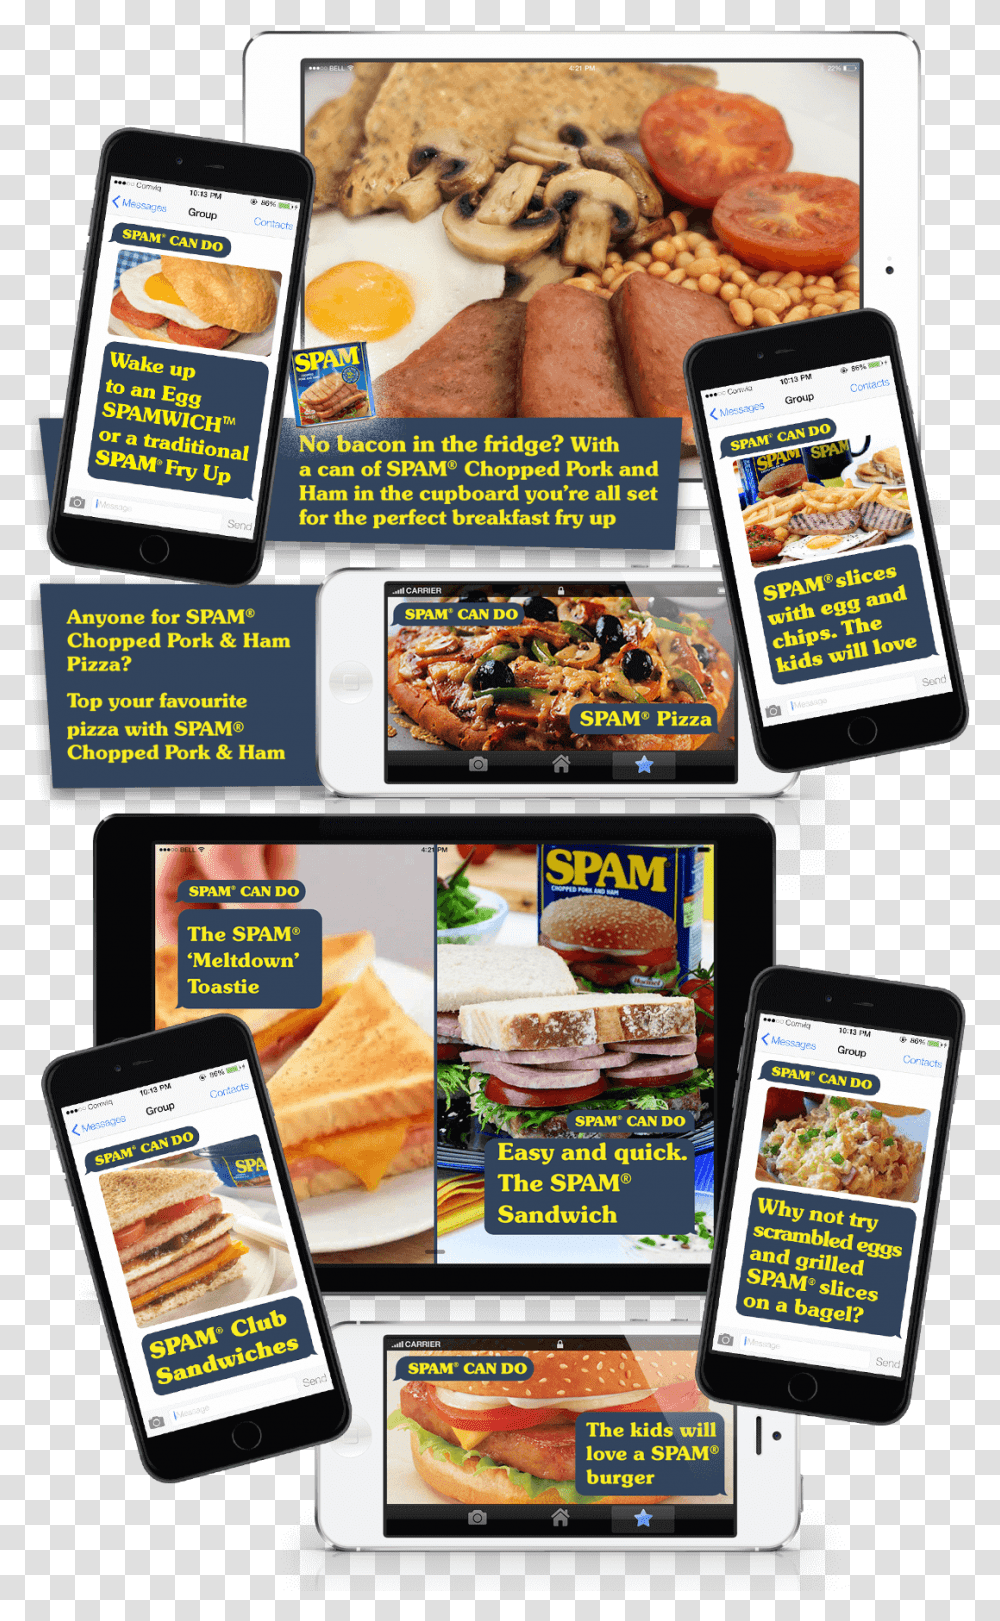 Make The Most Of Spam Chopped Pork And Ham Download Convenience Food, Mobile Phone, Electronics, Cell Phone, Advertisement Transparent Png